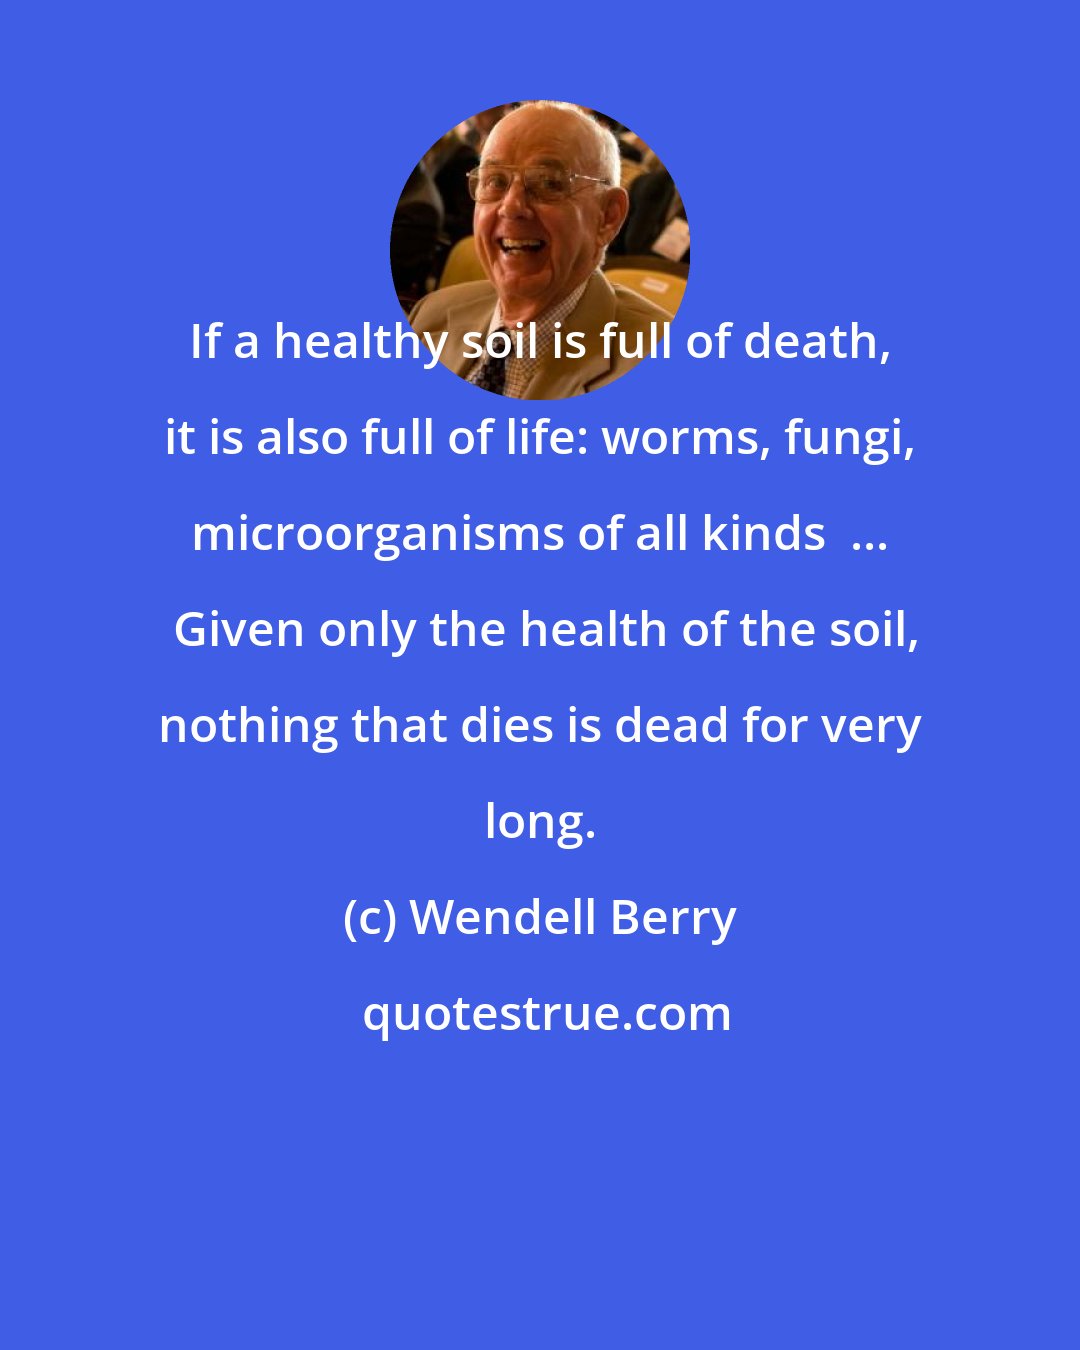 Wendell Berry: If a healthy soil is full of death, it is also full of life: worms, fungi, microorganisms of all kinds  ...  Given only the health of the soil, nothing that dies is dead for very long.